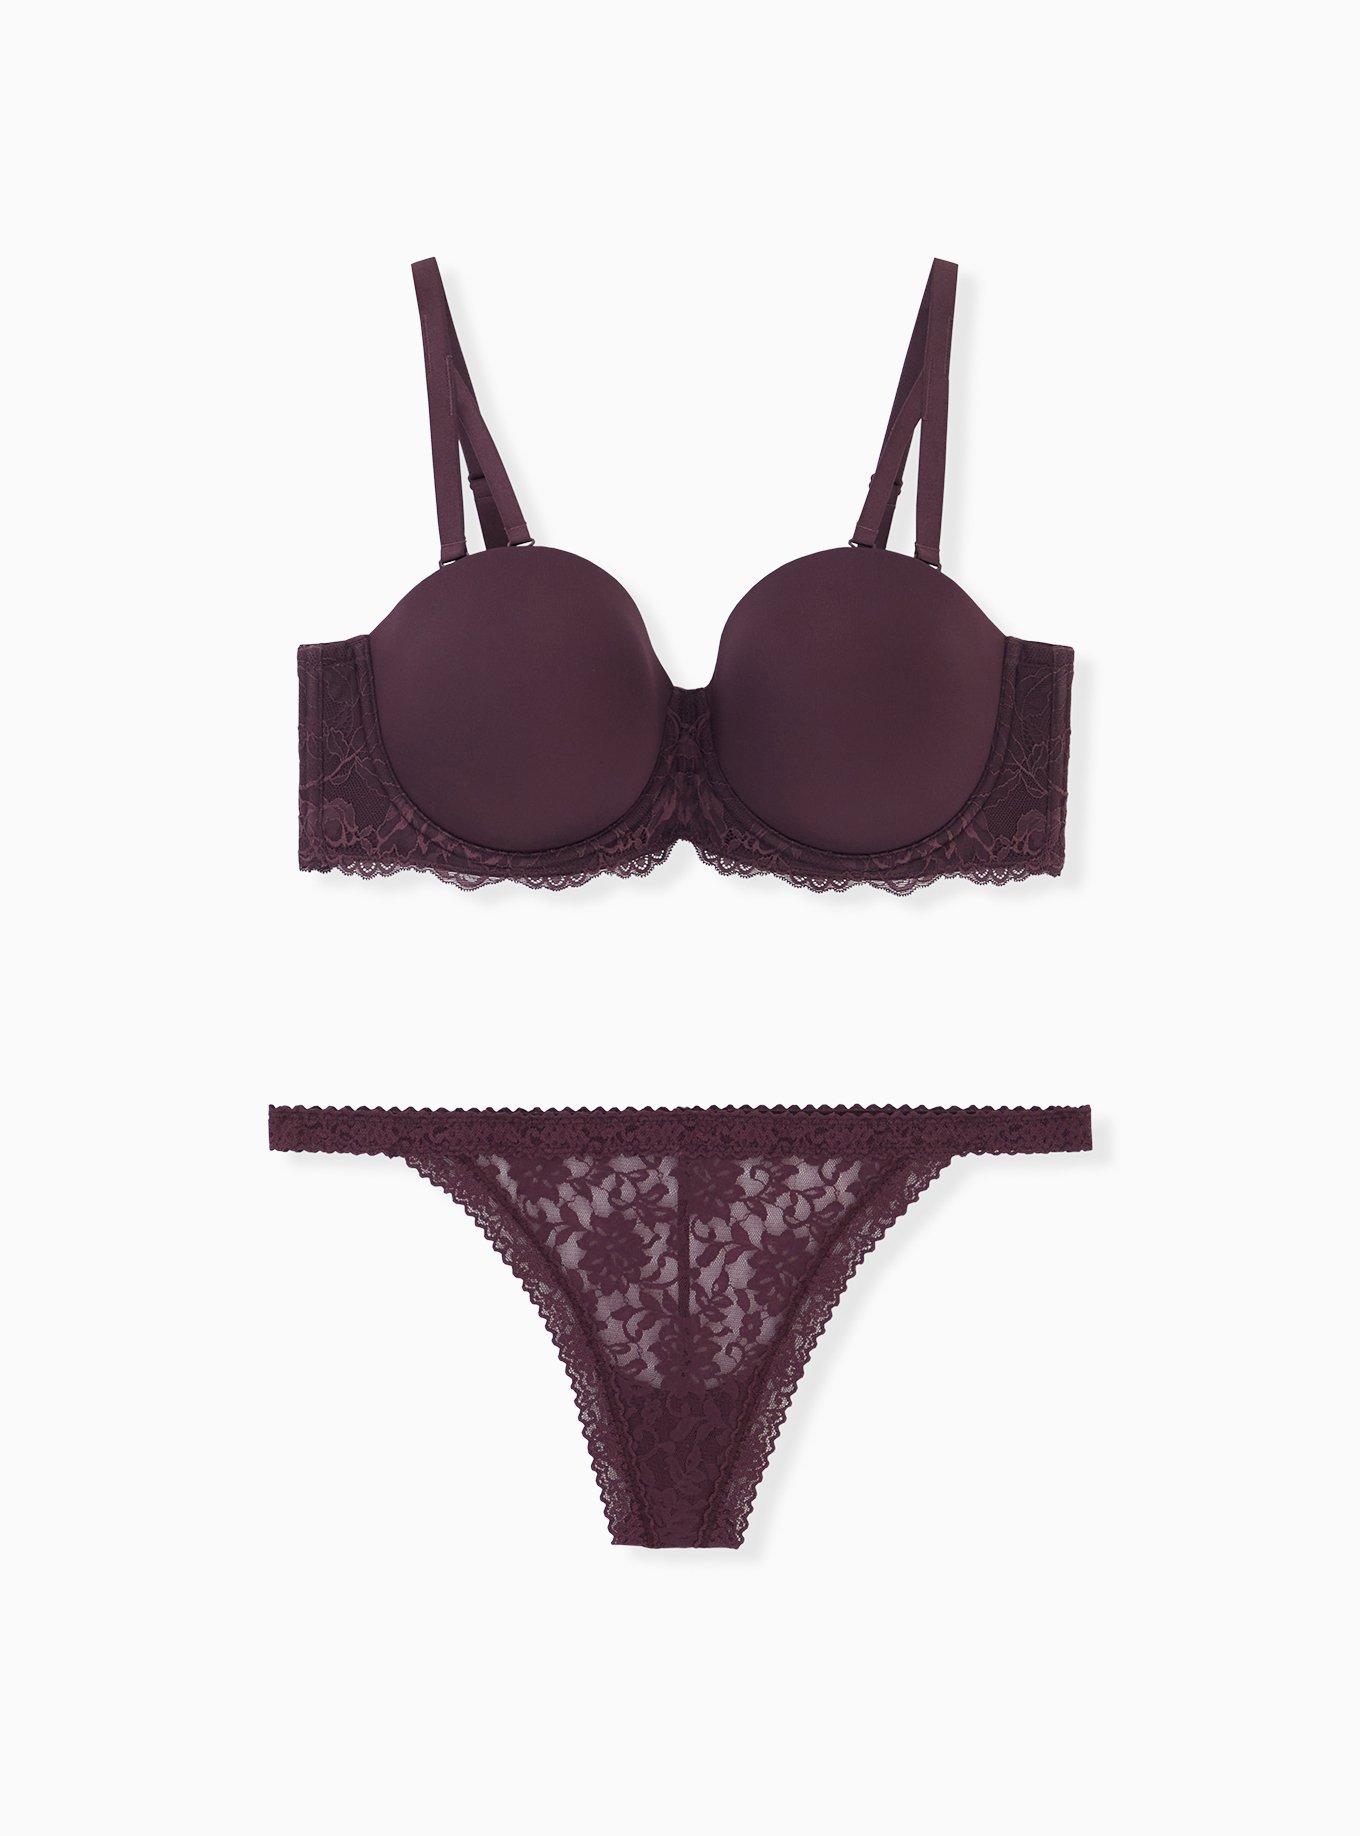 Low Waist G-String Panty in Maroon- Lace